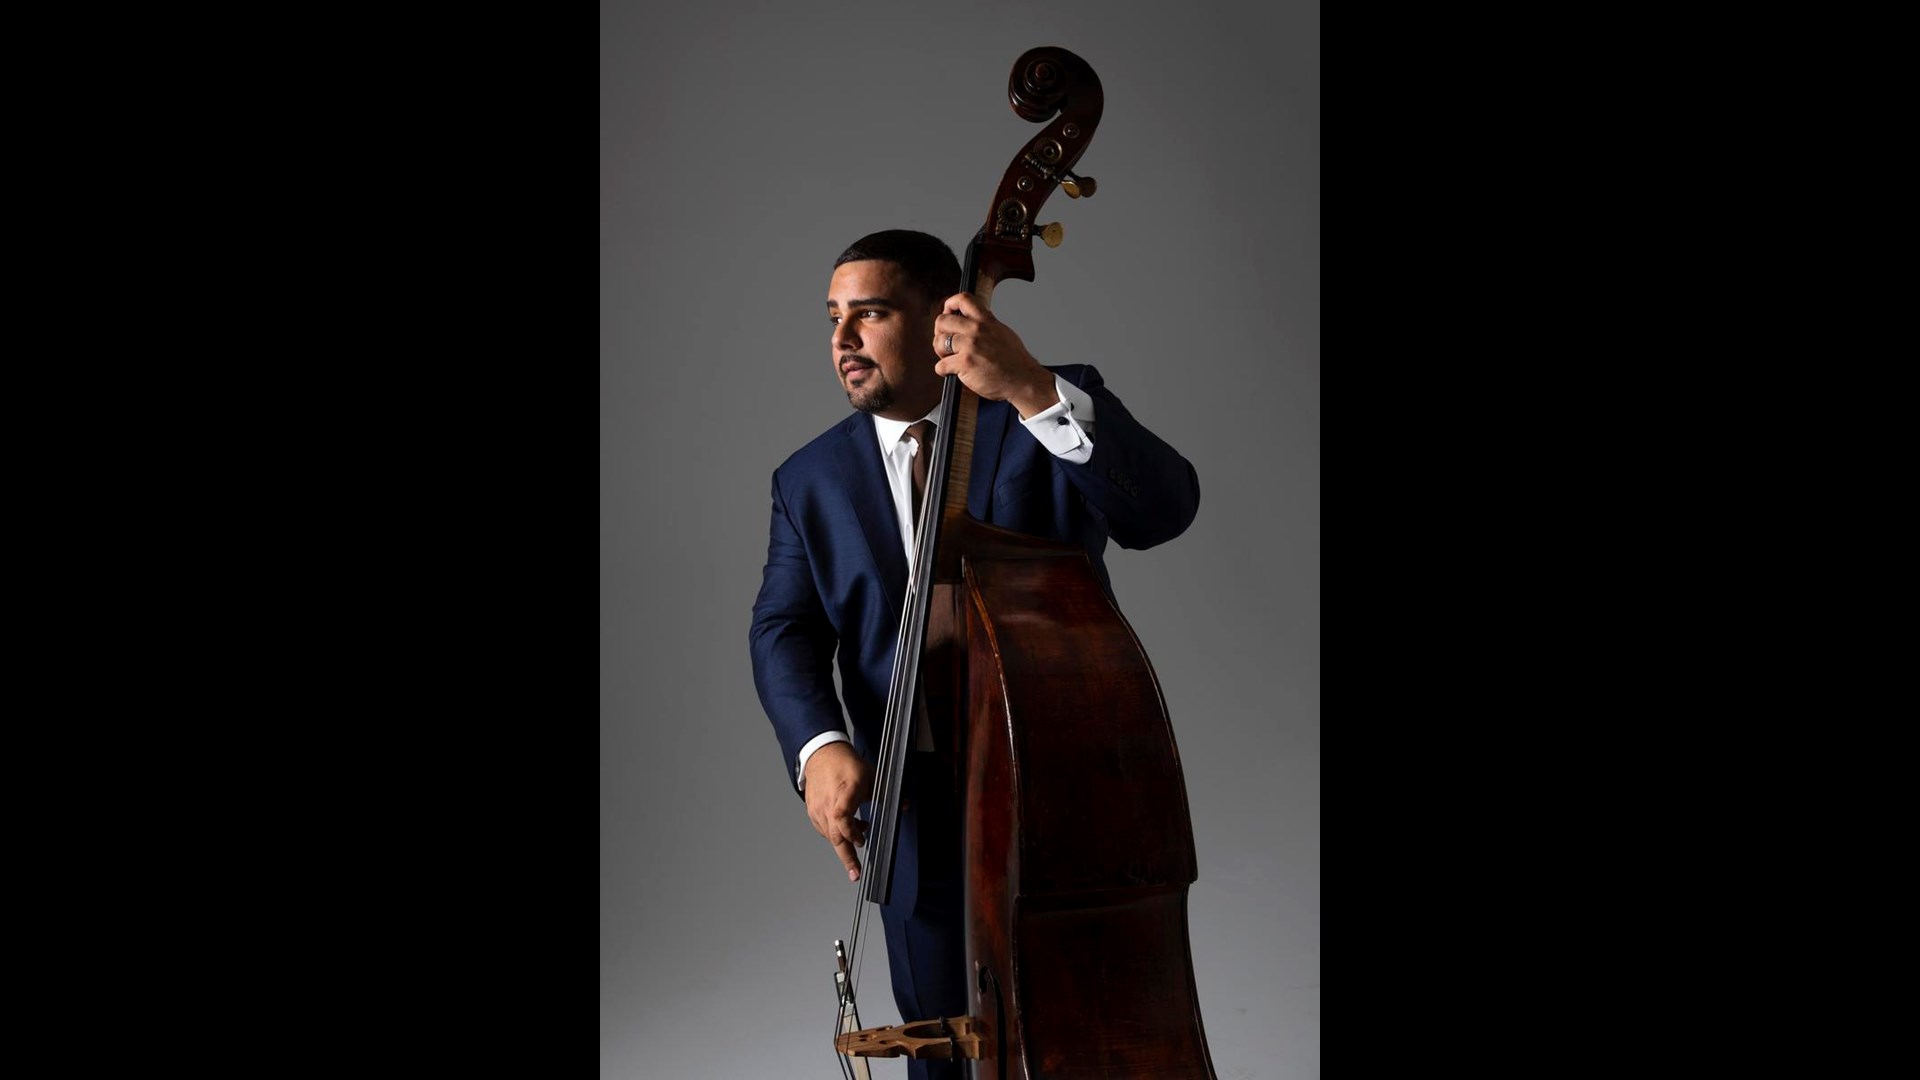 A man with medium complexion and short dark hair in a blue suit playing a double bass against a grey background.